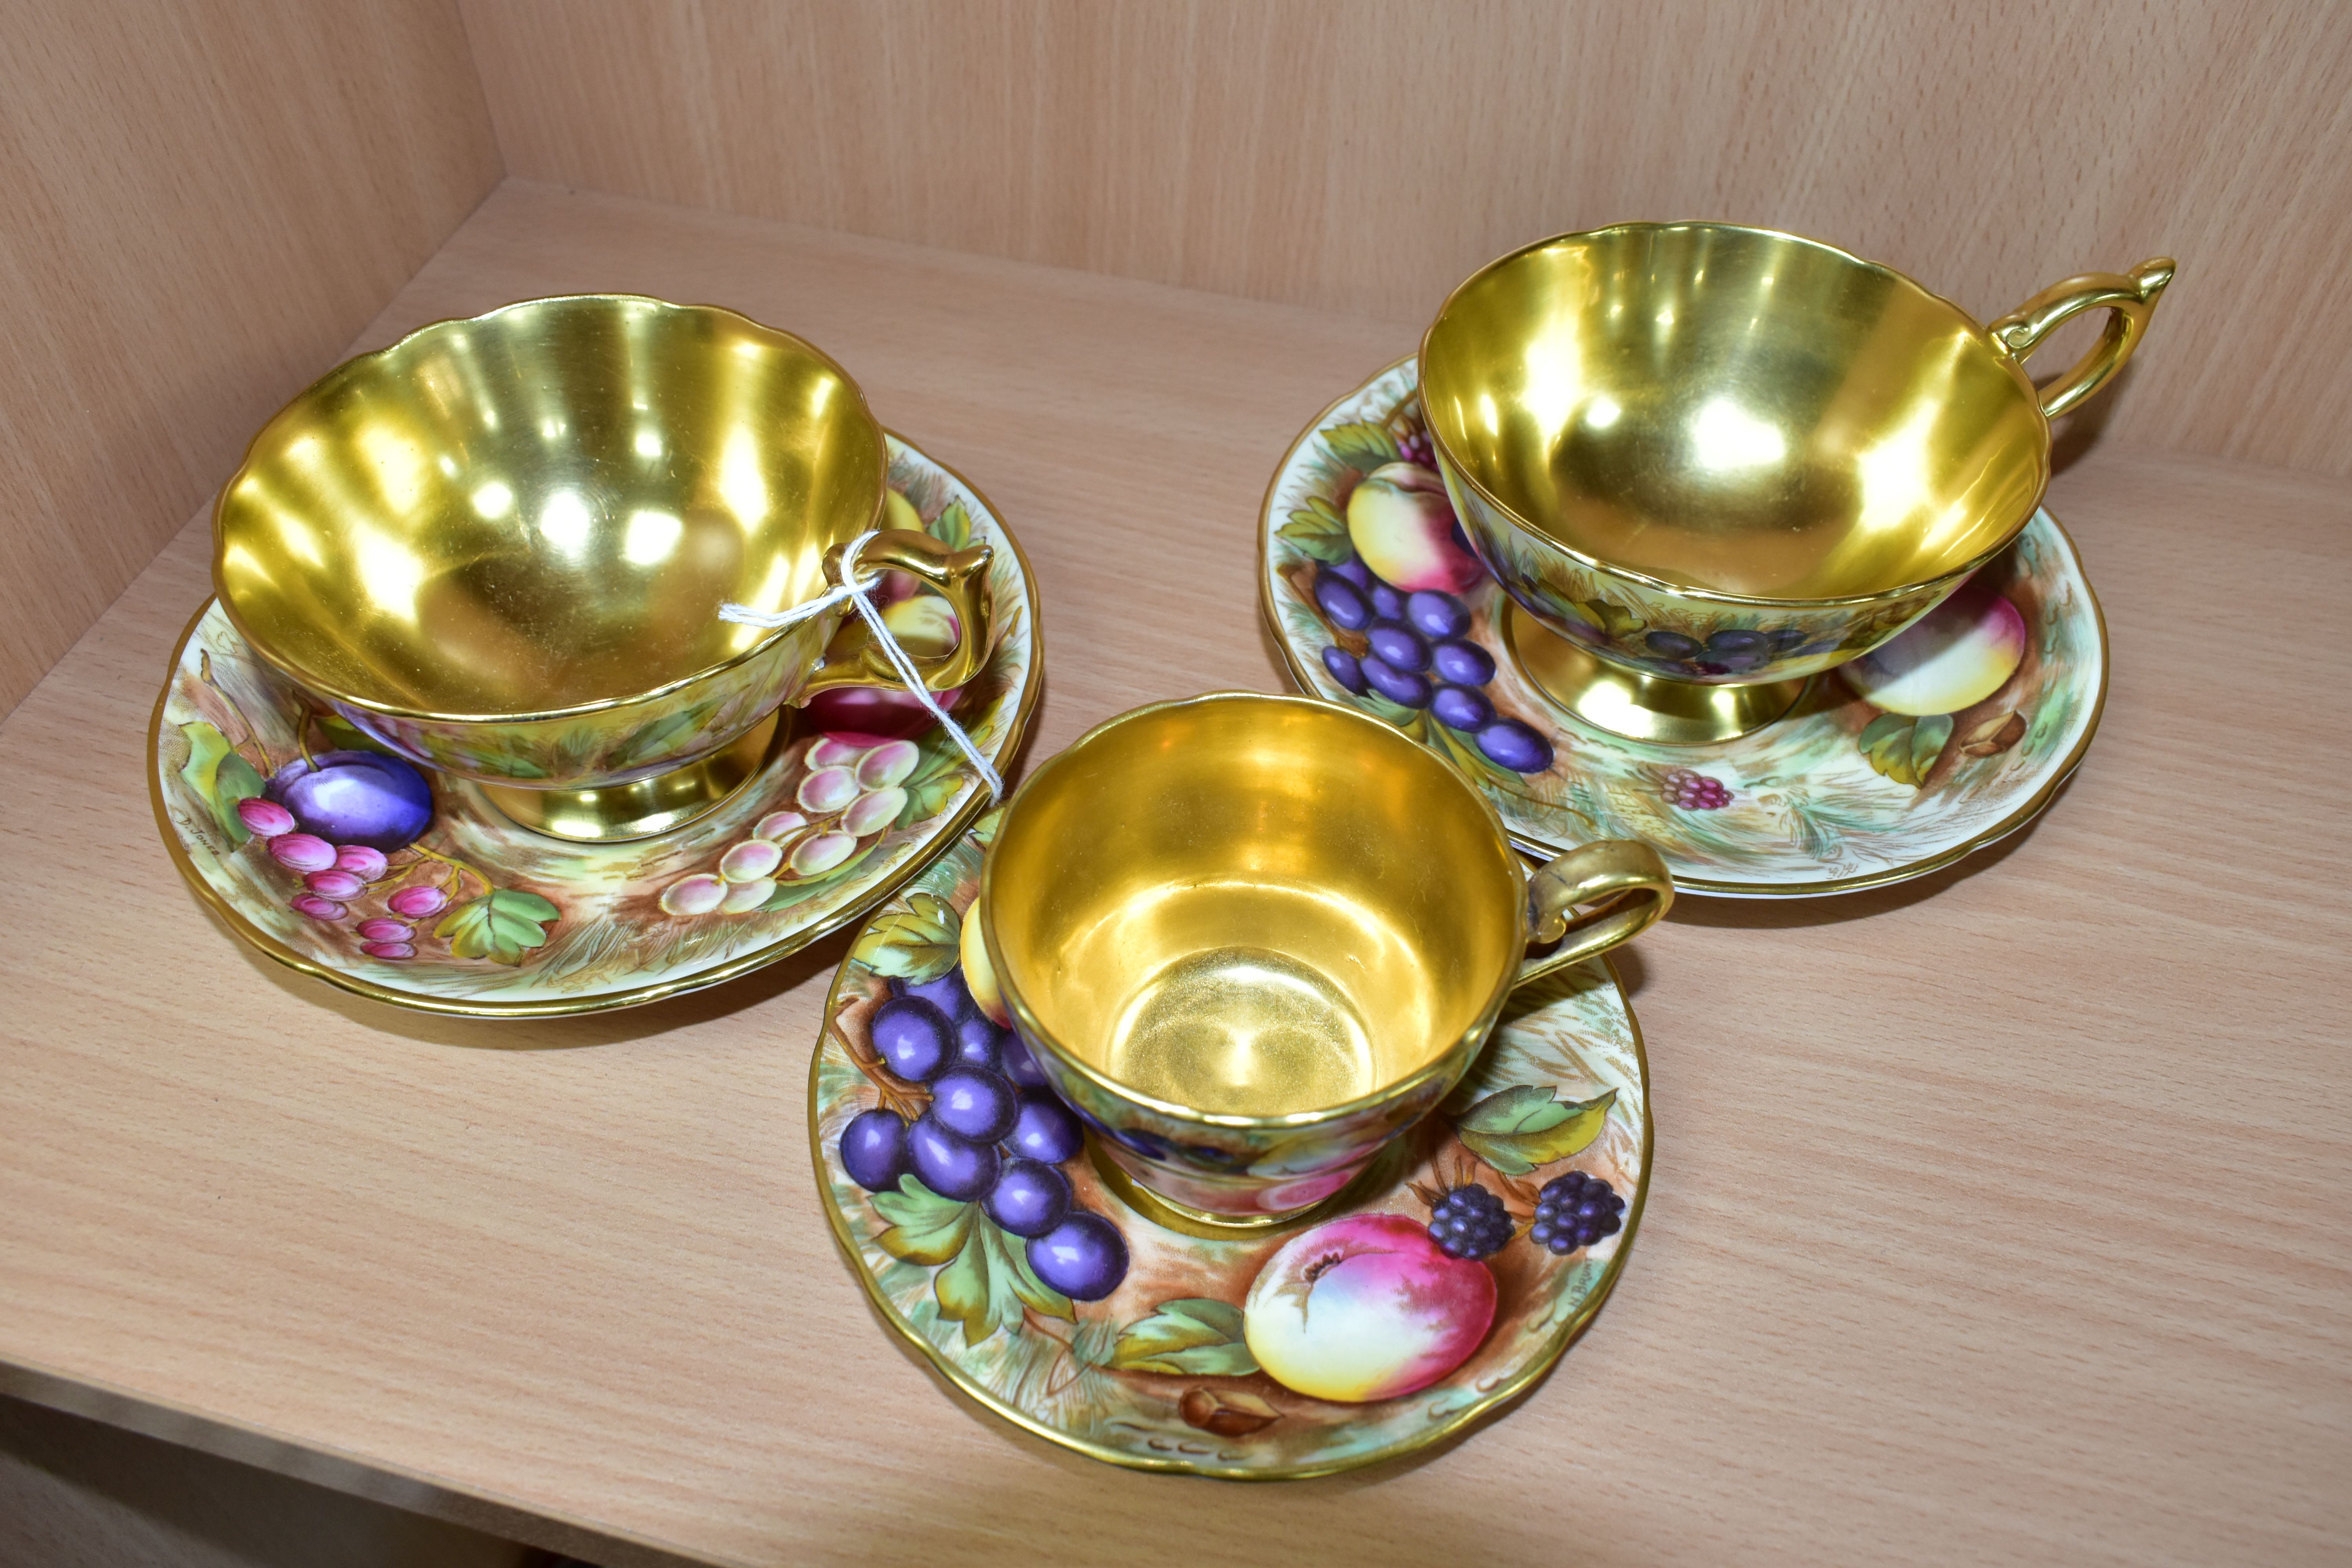 TWO AYNSLEY FRUIT DECORATED TEA CUPS AND SAUCERS SIGNED D.JONES AND A COFFEE CUP AND SAUCER SIGNED - Image 2 of 5